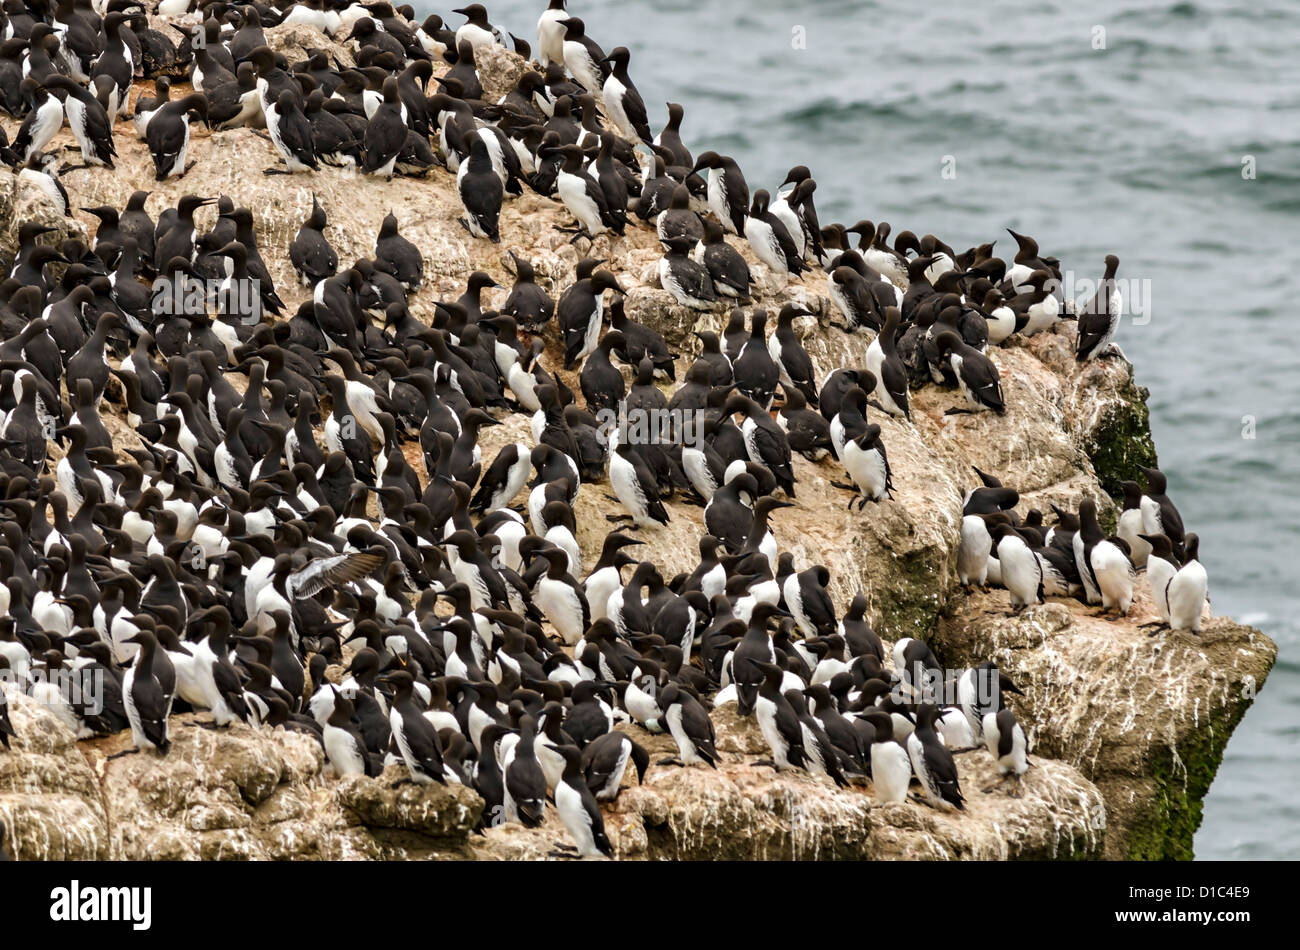 Common Murre at Yaquina Head Outstanding Natural Area, Oregon Stock Photo